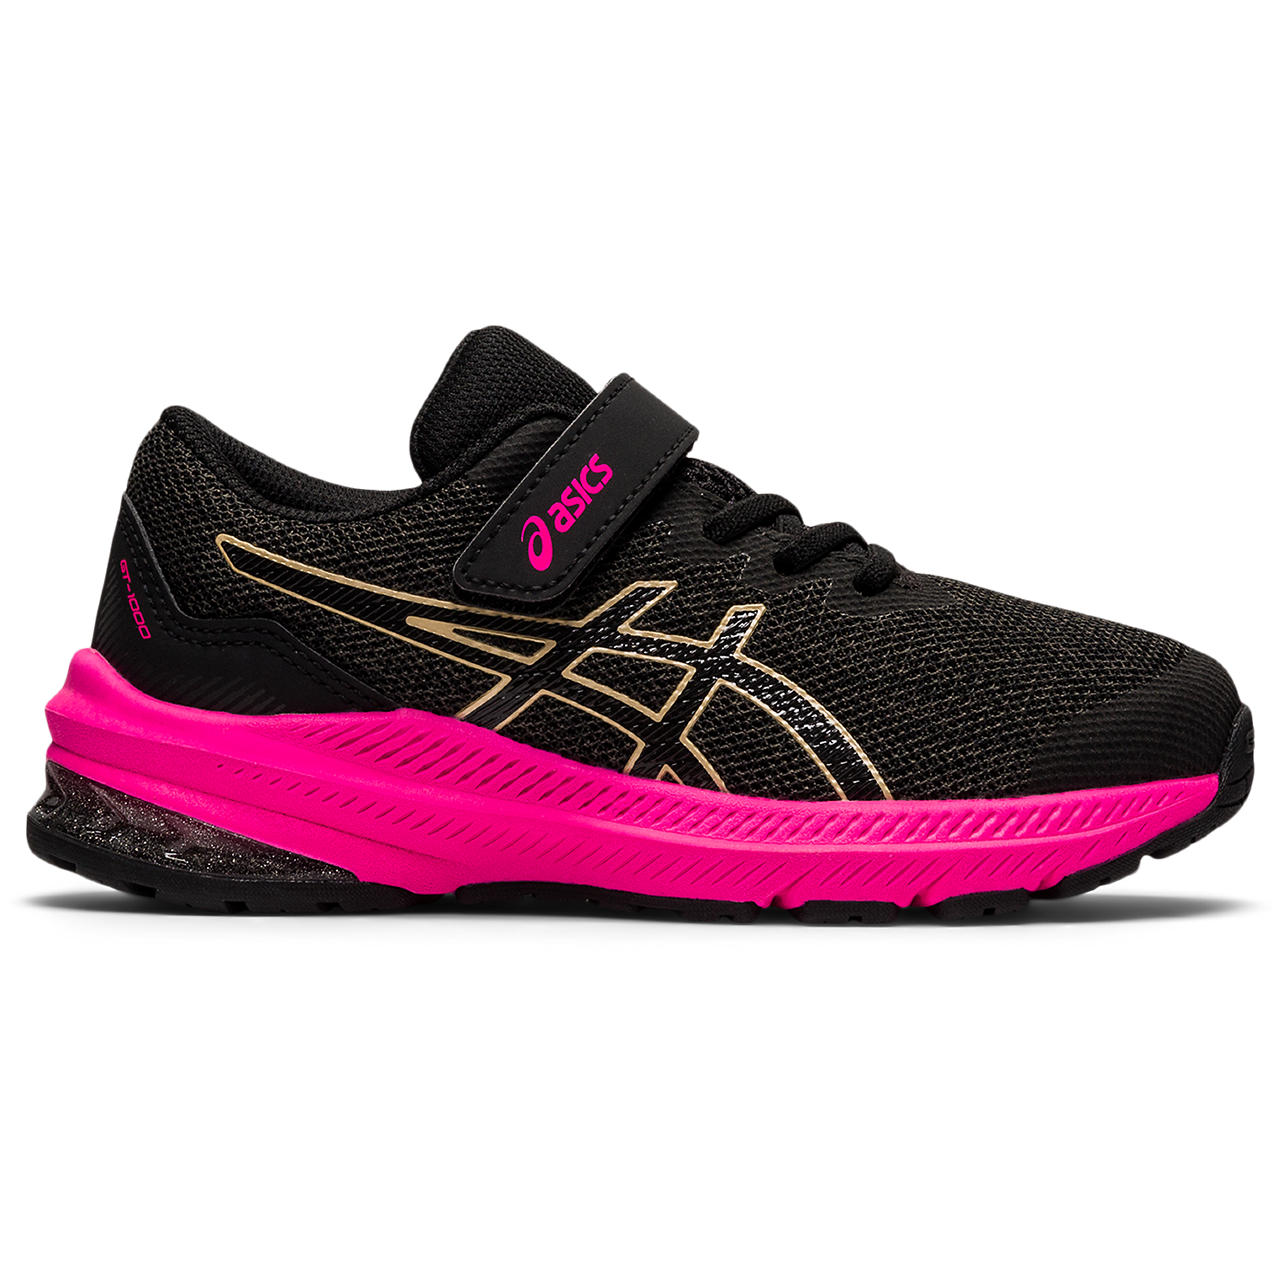 ASICS GT-1000 11 PS, GRAPHITE GREY/CHAMPAGNE, swatch